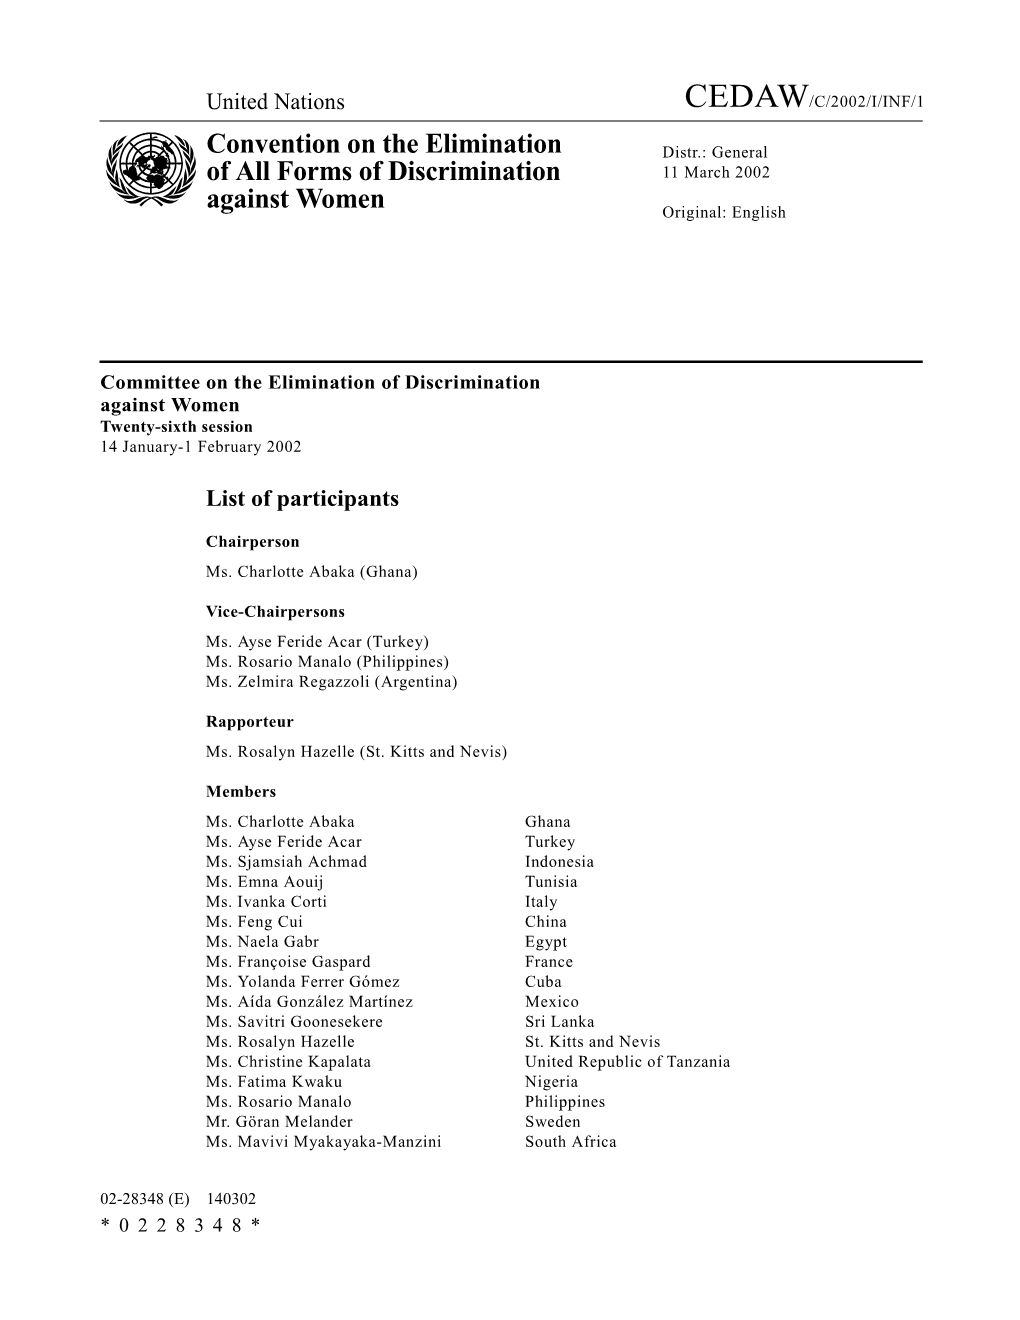 Representatives of States Parties